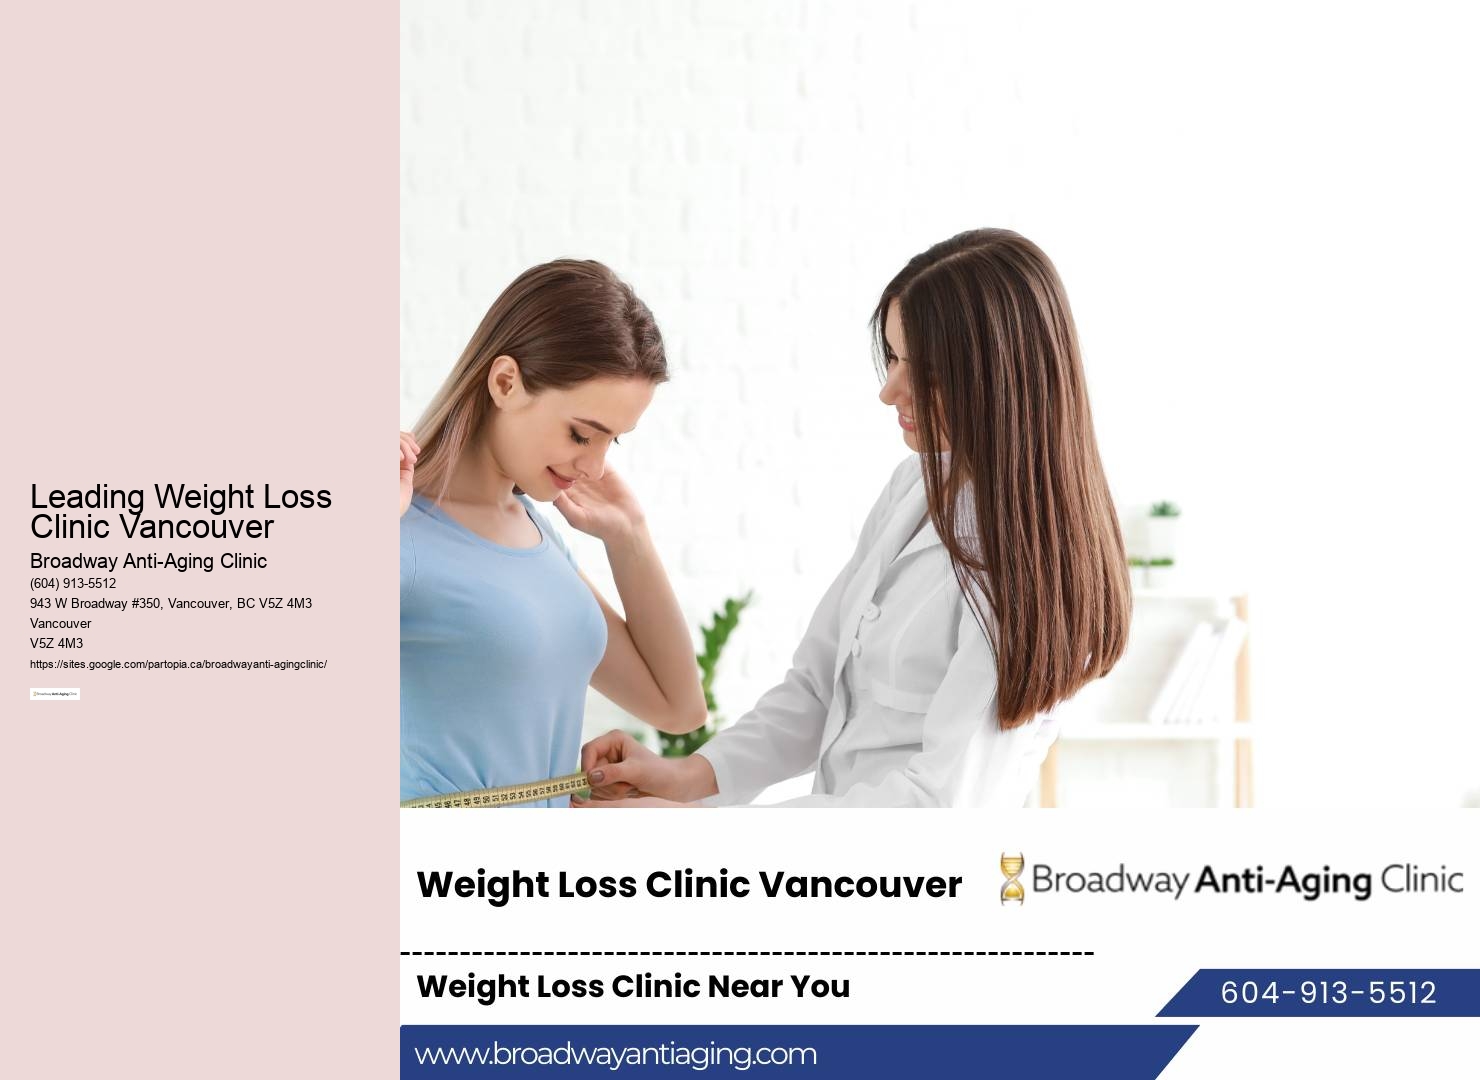 How Does A Weight Loss Clinic Work